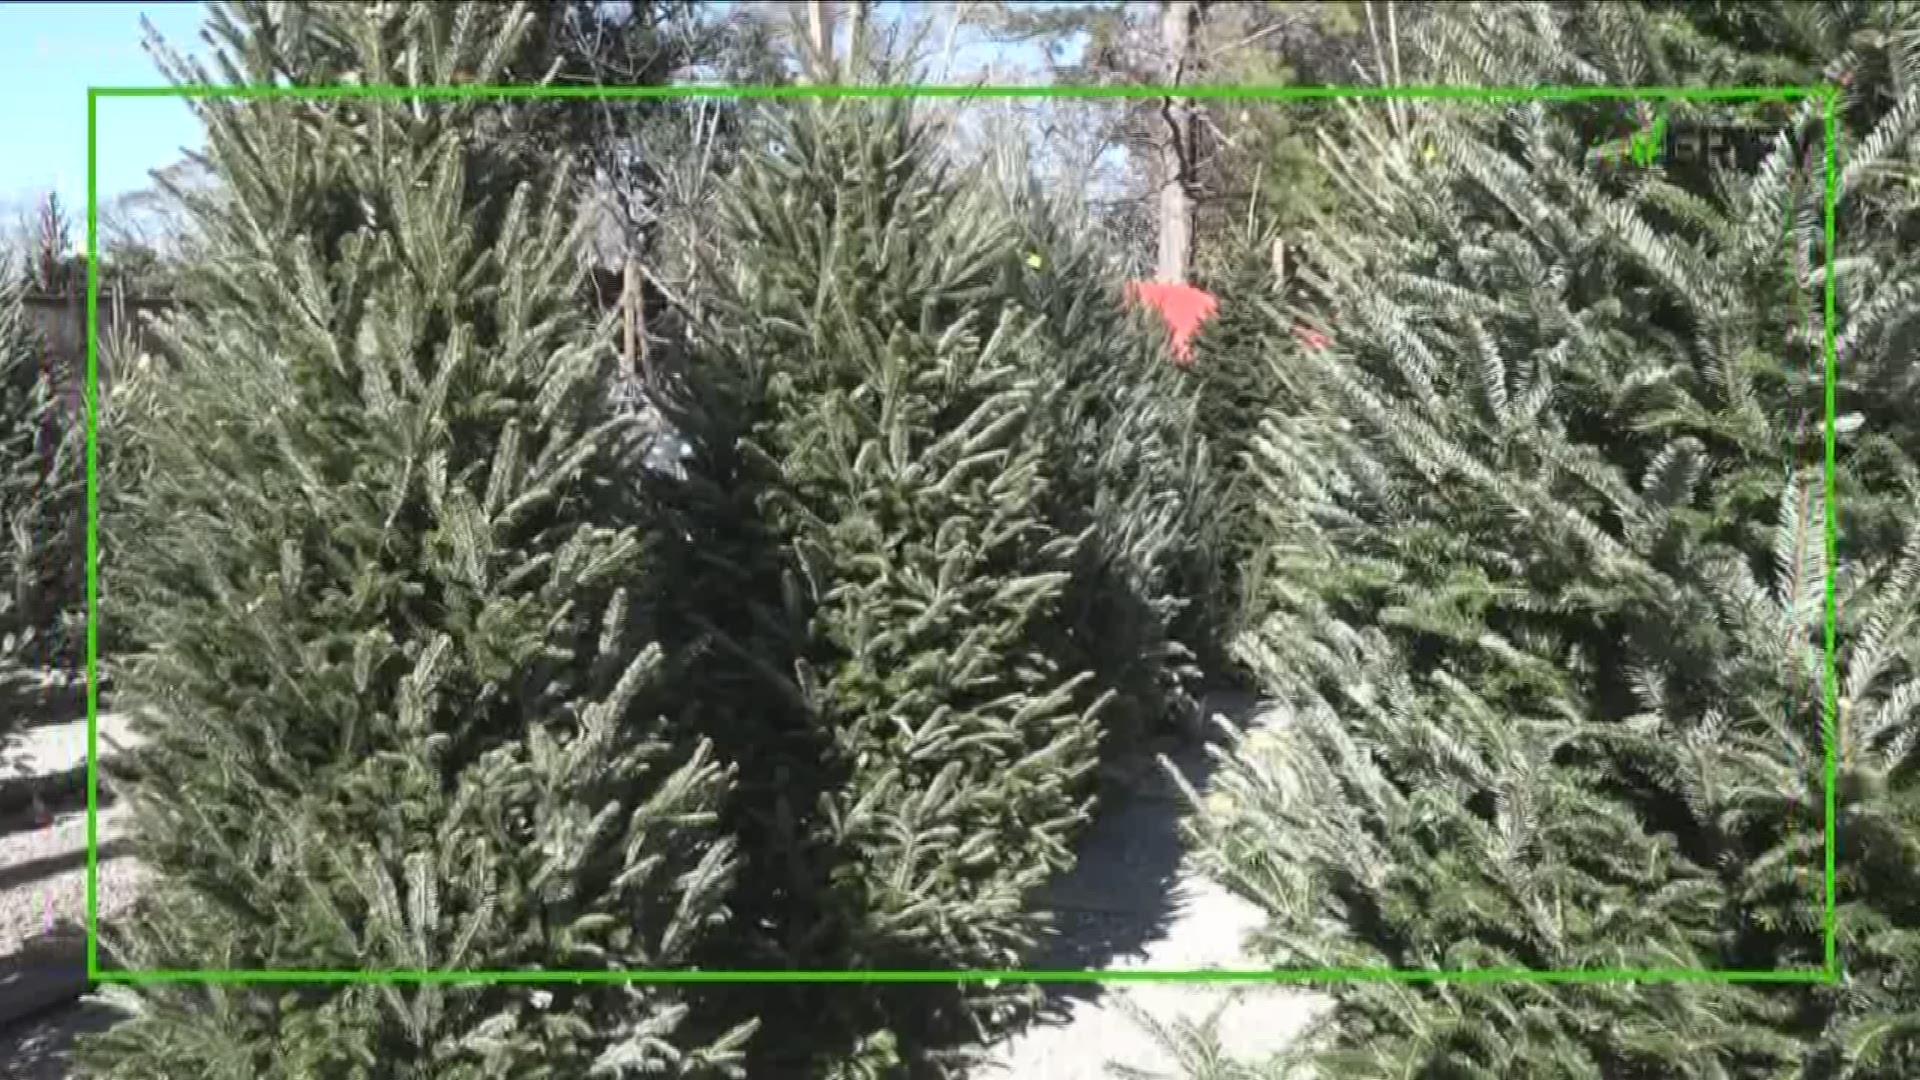 11Alive's Liza Lucas looks at the local impact of a national Christmas tree shortage.